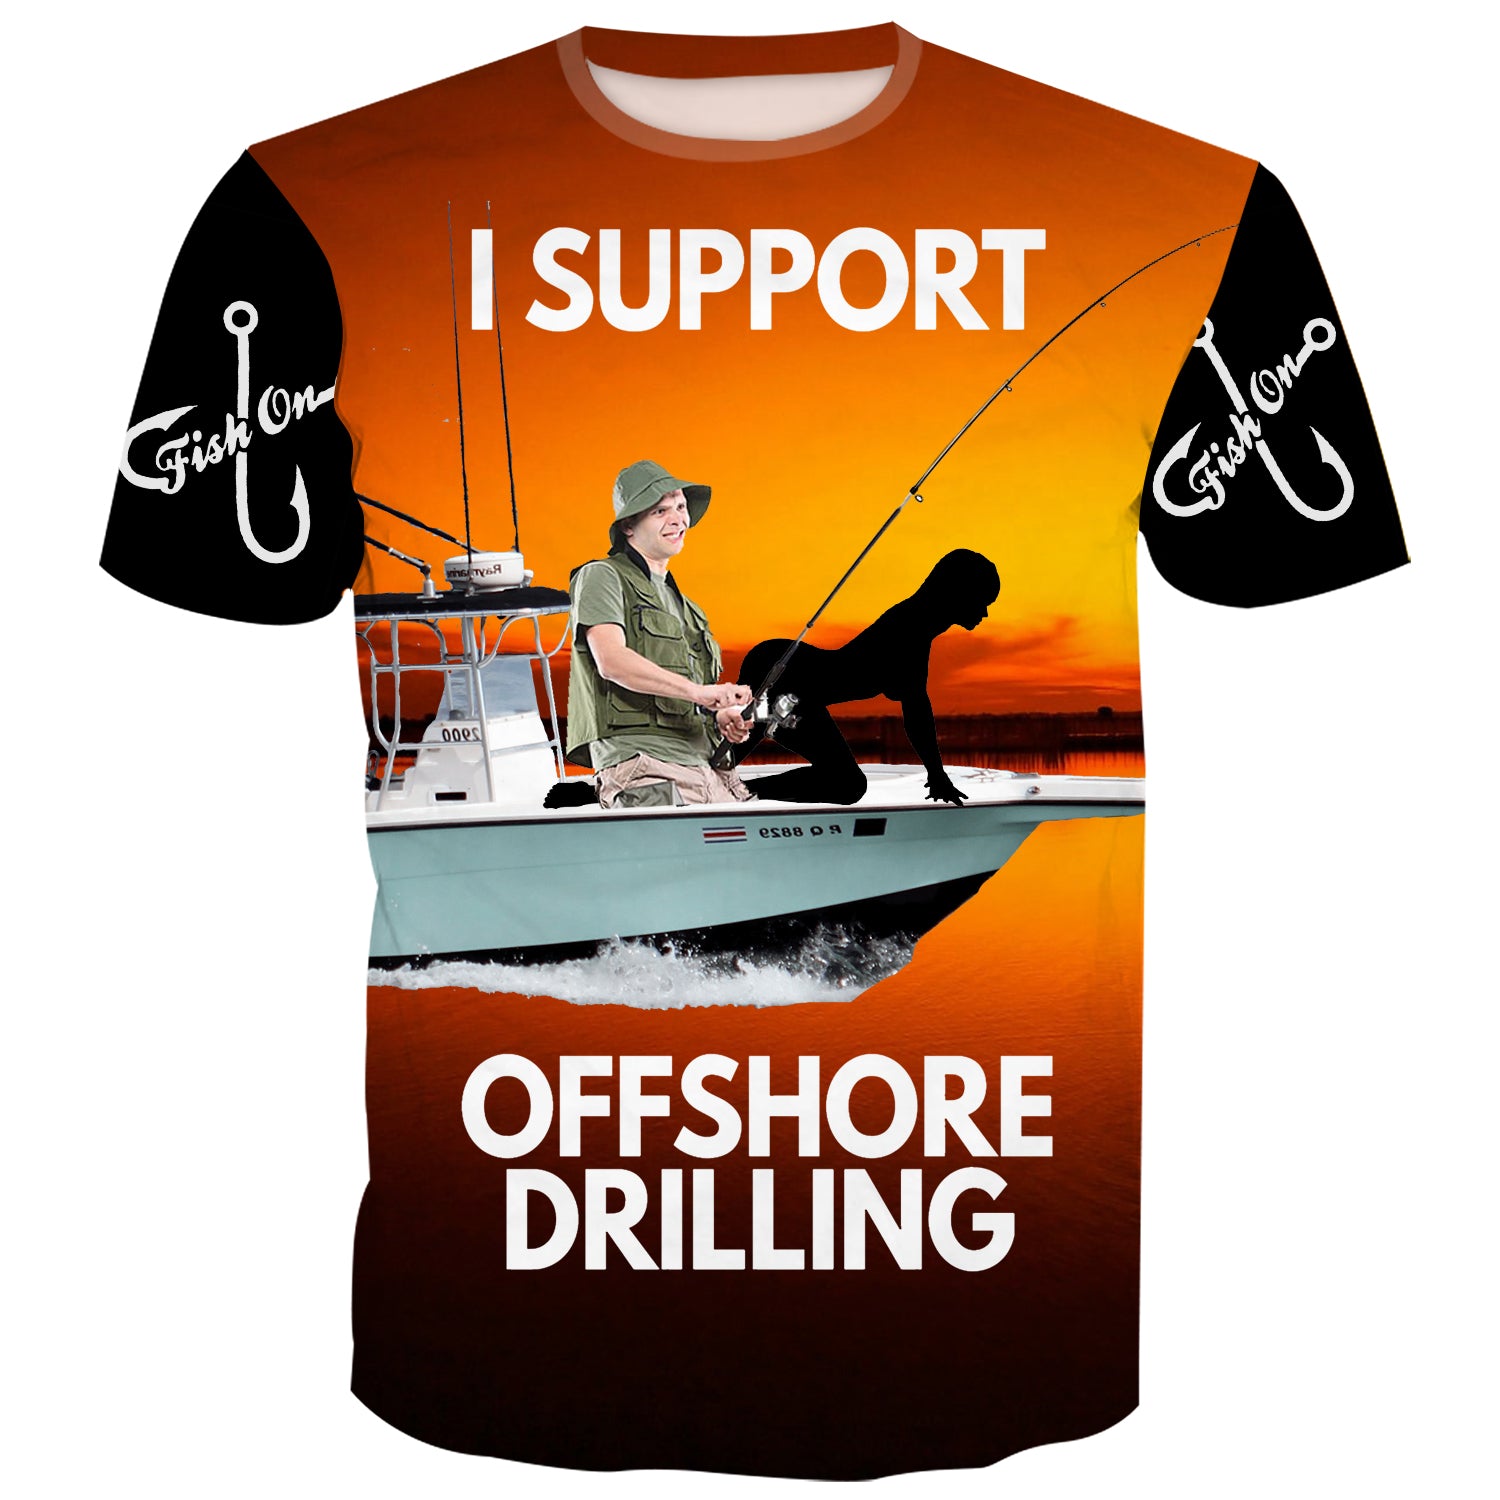 I support Offshore Drilling - T-Shirt